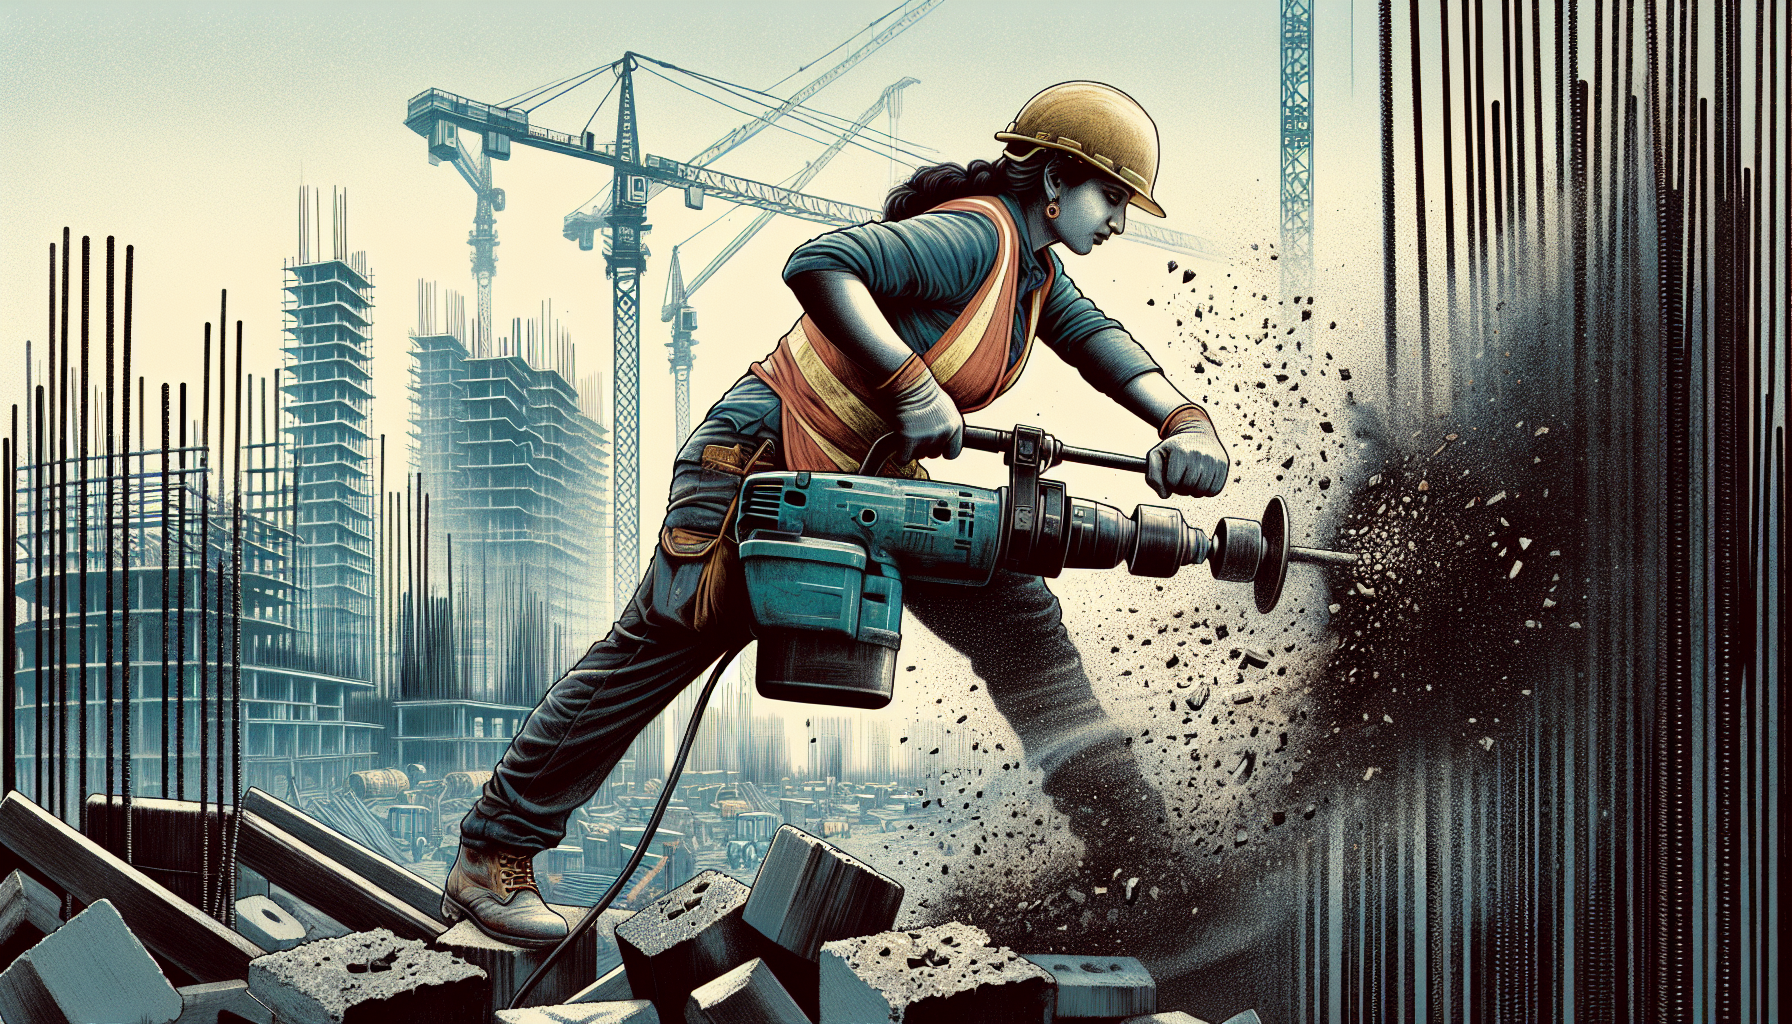 Construction worker using power tools